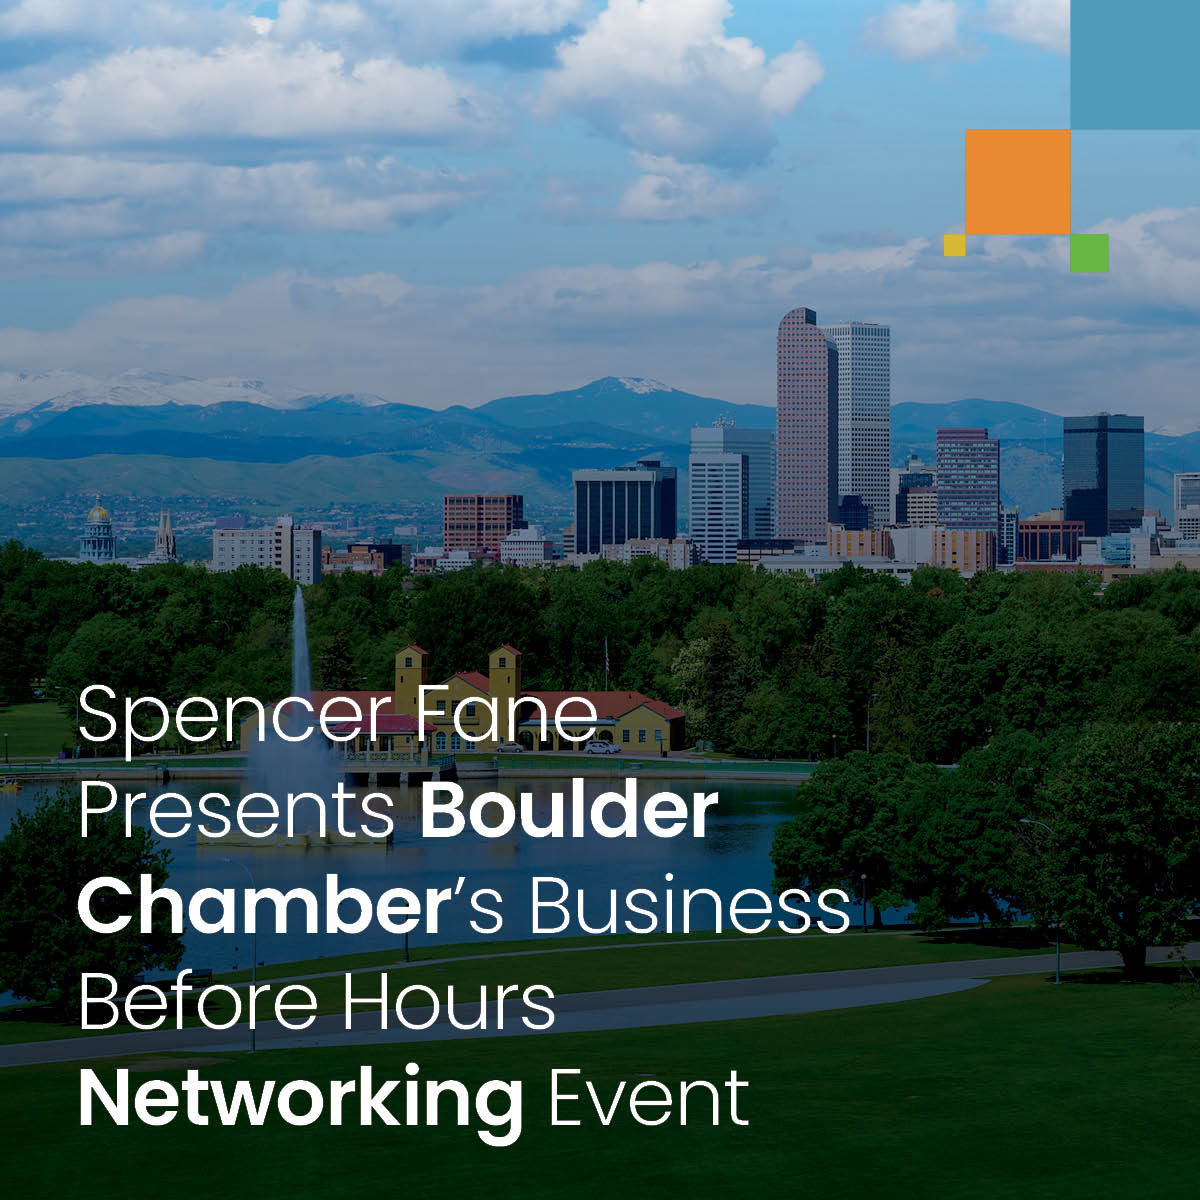 Spencer Fane hosts Boulder Chamber Business Before Hours Networking Event